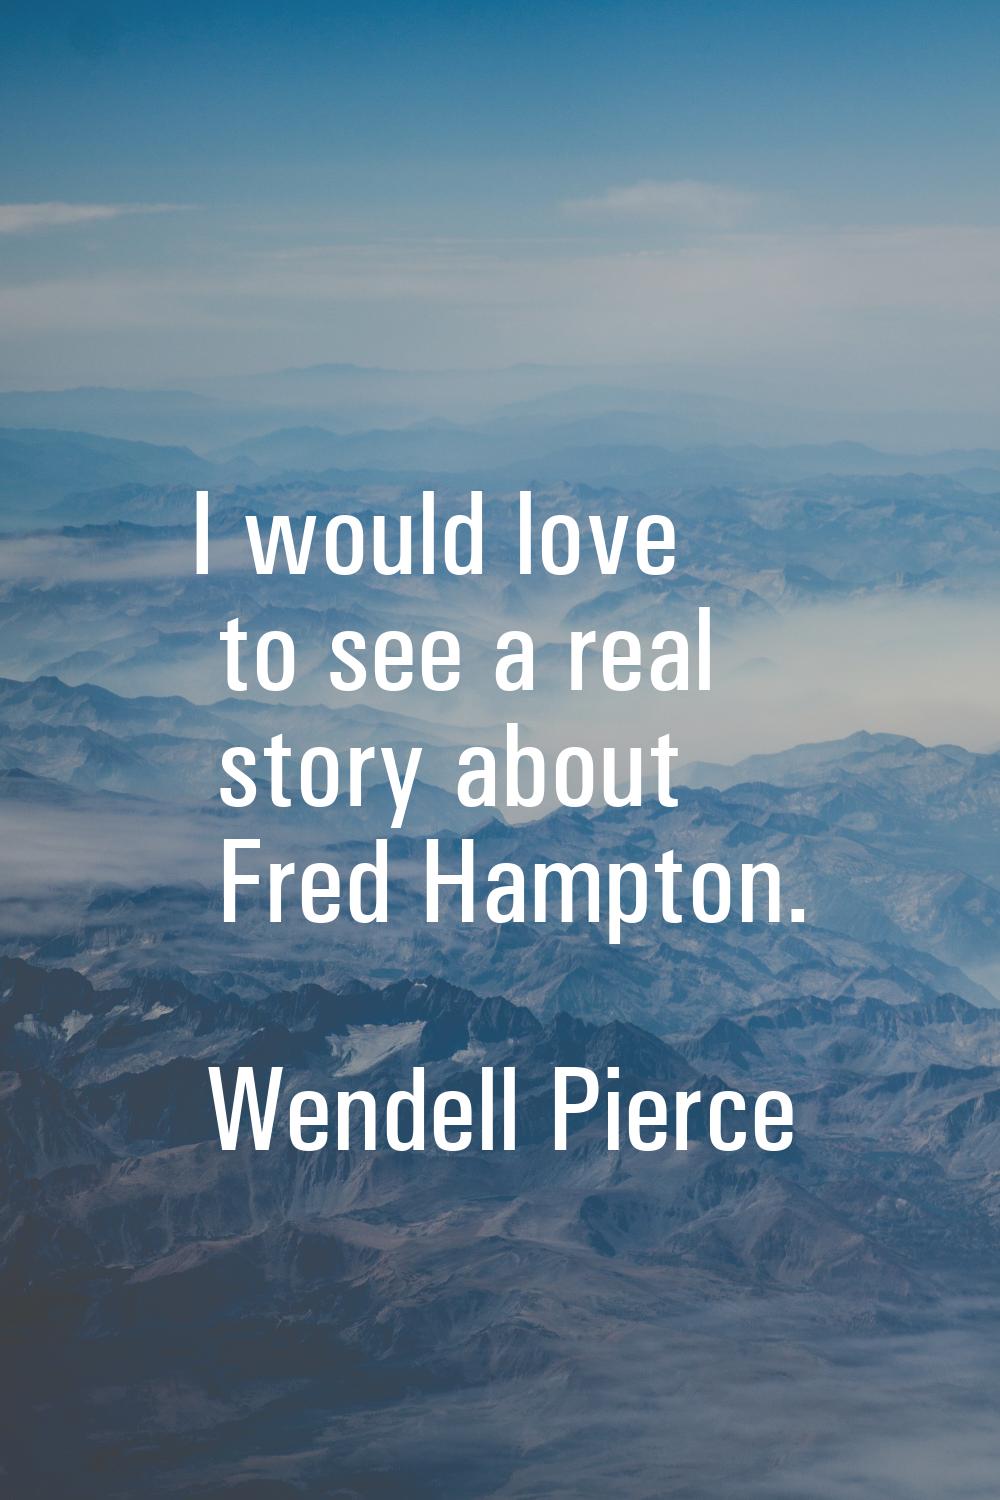 I would love to see a real story about Fred Hampton.